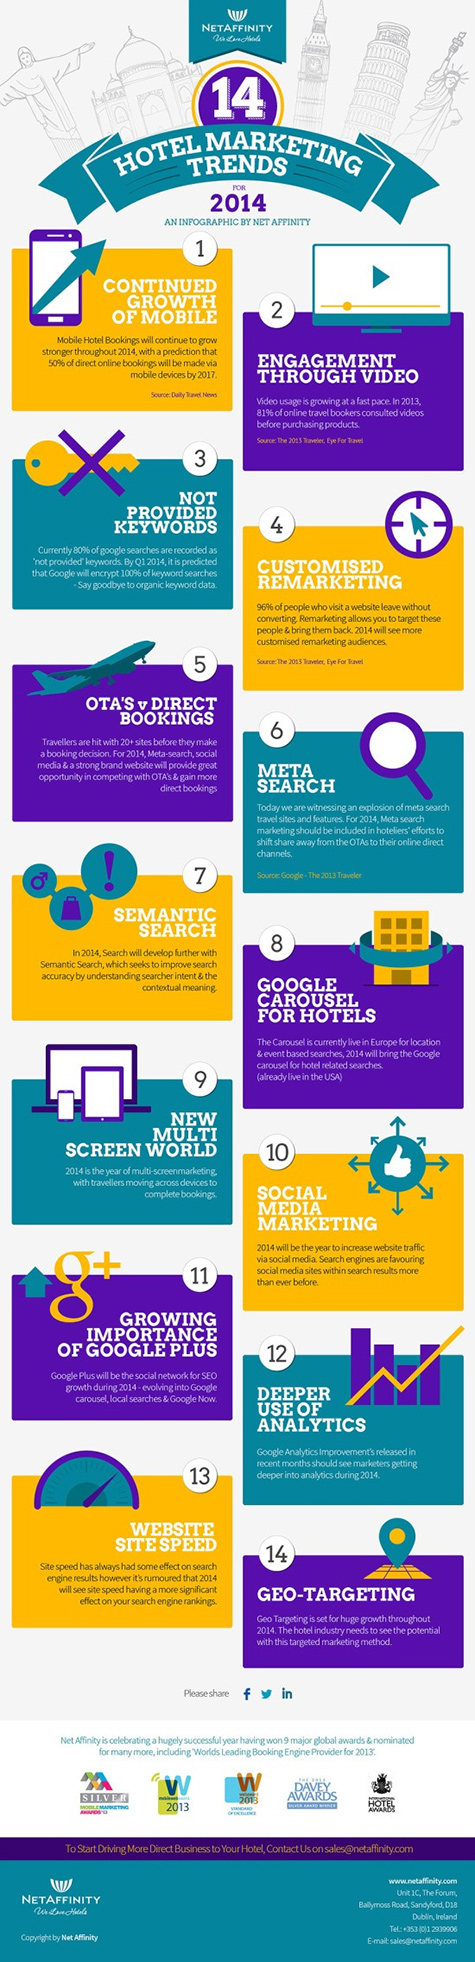 hotel marketing trends for 2014 infographic 475